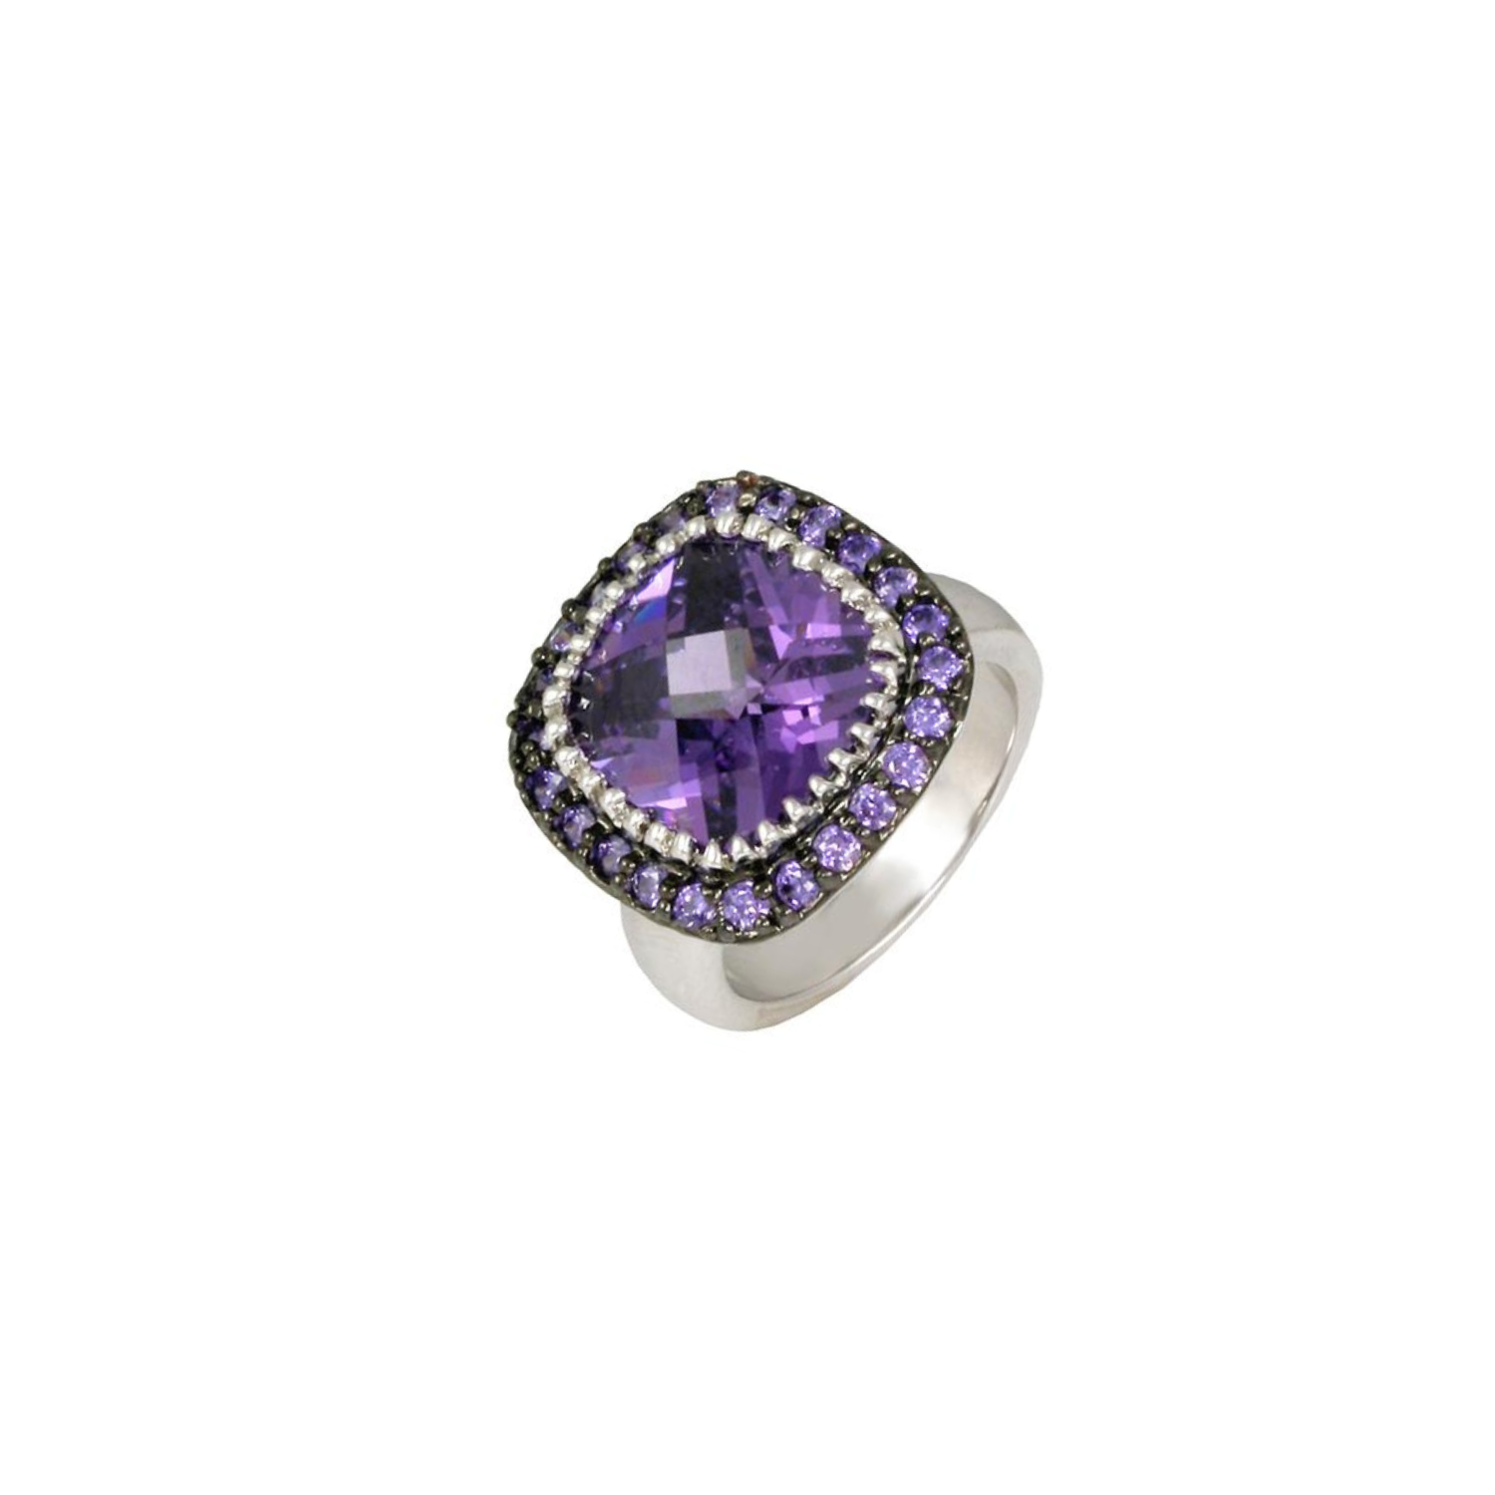 Petunia 2.75 Ct. Square CZ Amethyst Cocktail Ring, Silver - Zahra Jewelry